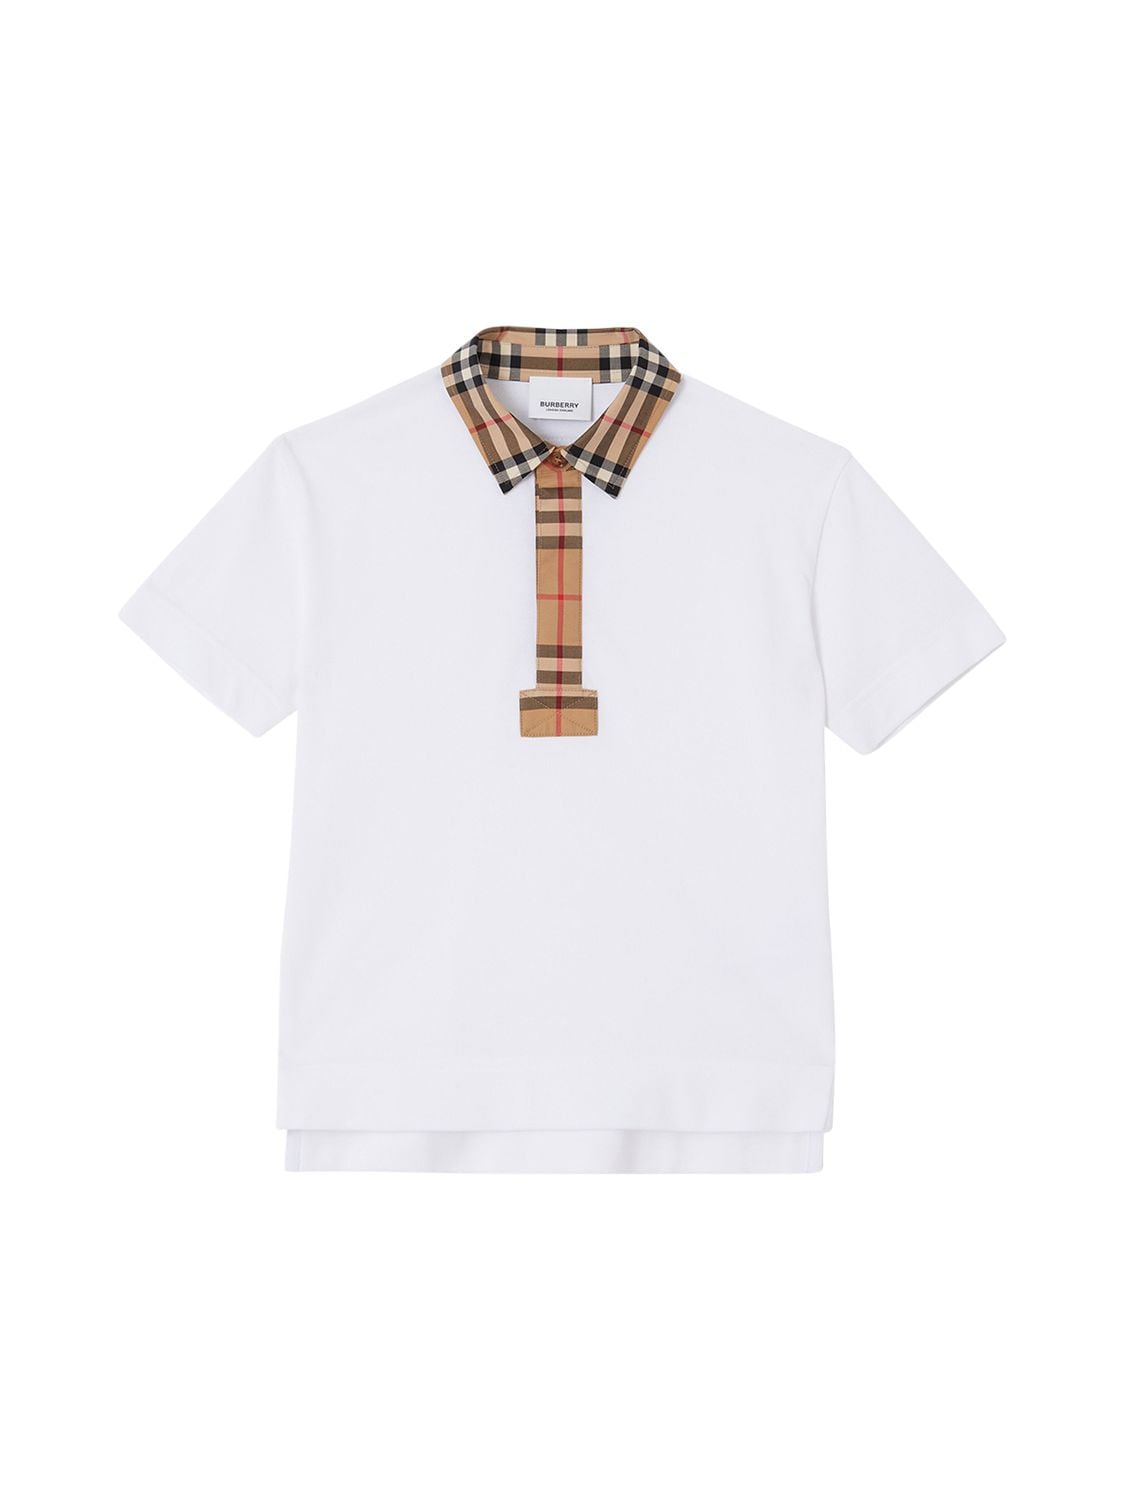 Image of Cotton Piqué Polo Shirt W/ Check Inserts